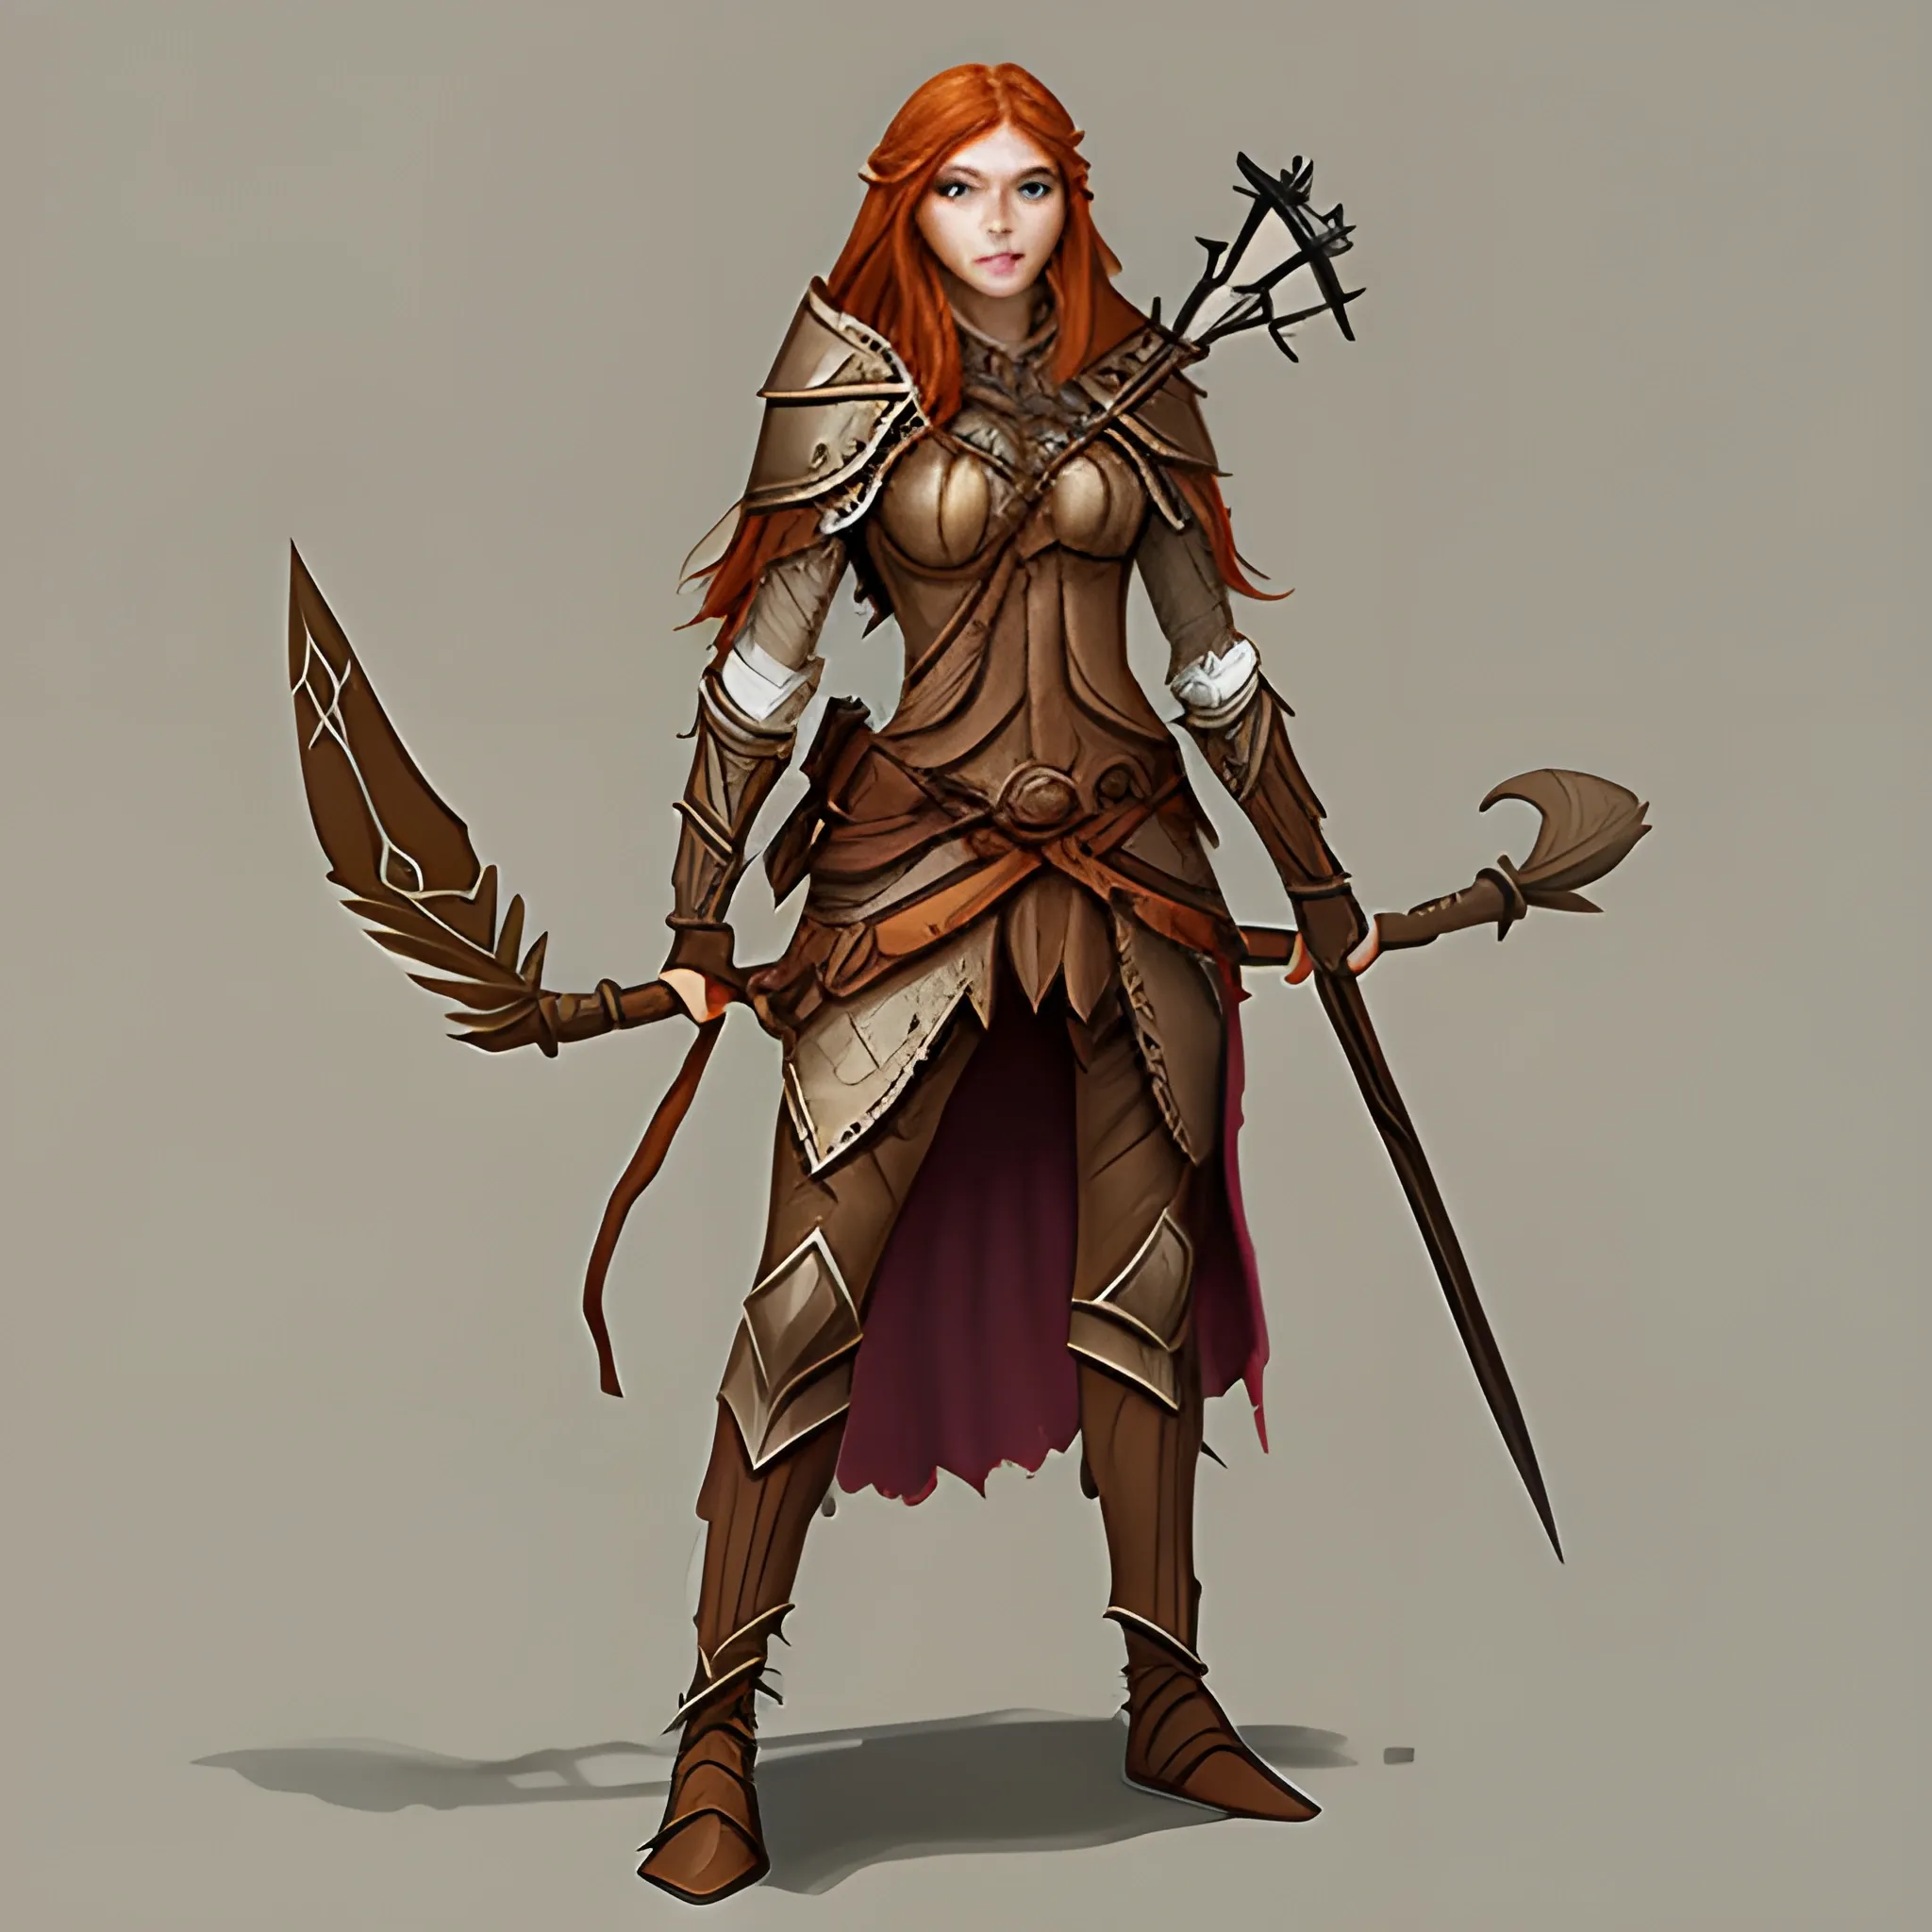 Wood Elf, Female, Concept Art, Ginger hair, long hair, with spear, leather armor, mail armor on the shoulders, with cloak on the back, Dungeons and Dragons